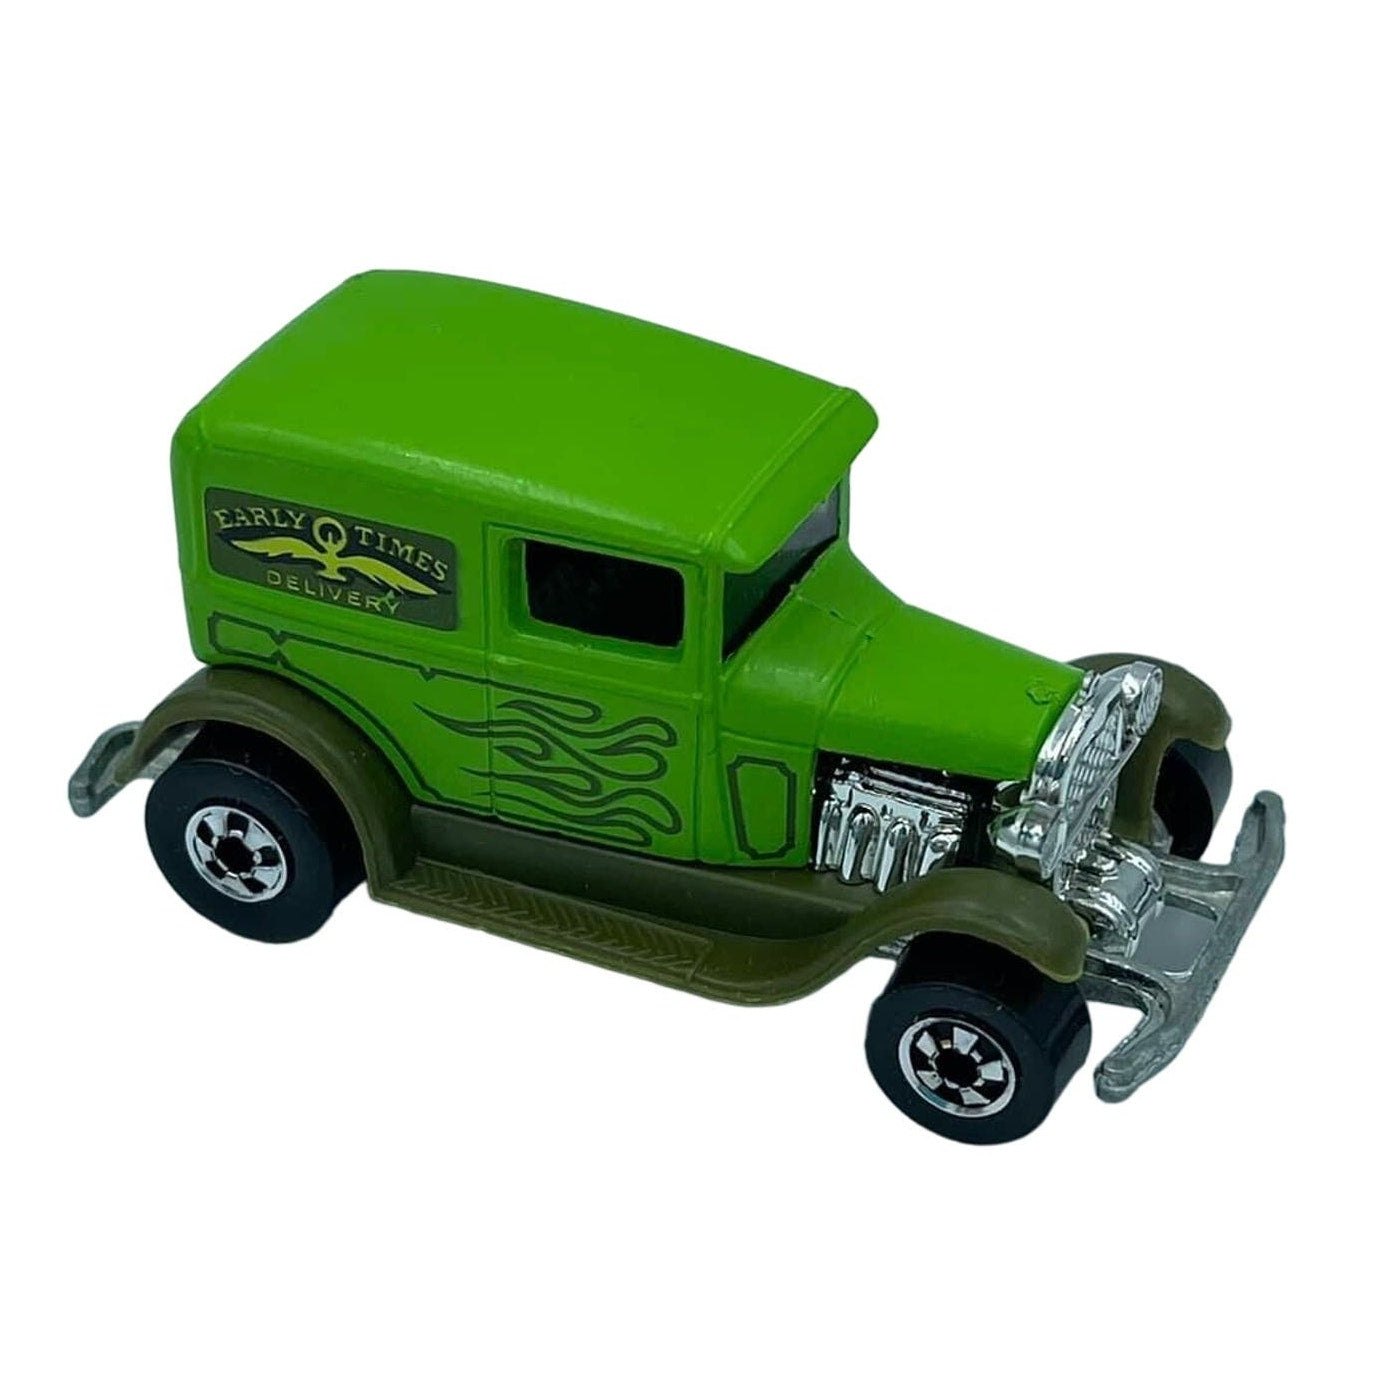 1977 Hot Wheels Green Early Times Delivery Truck Mattel Hong Kong